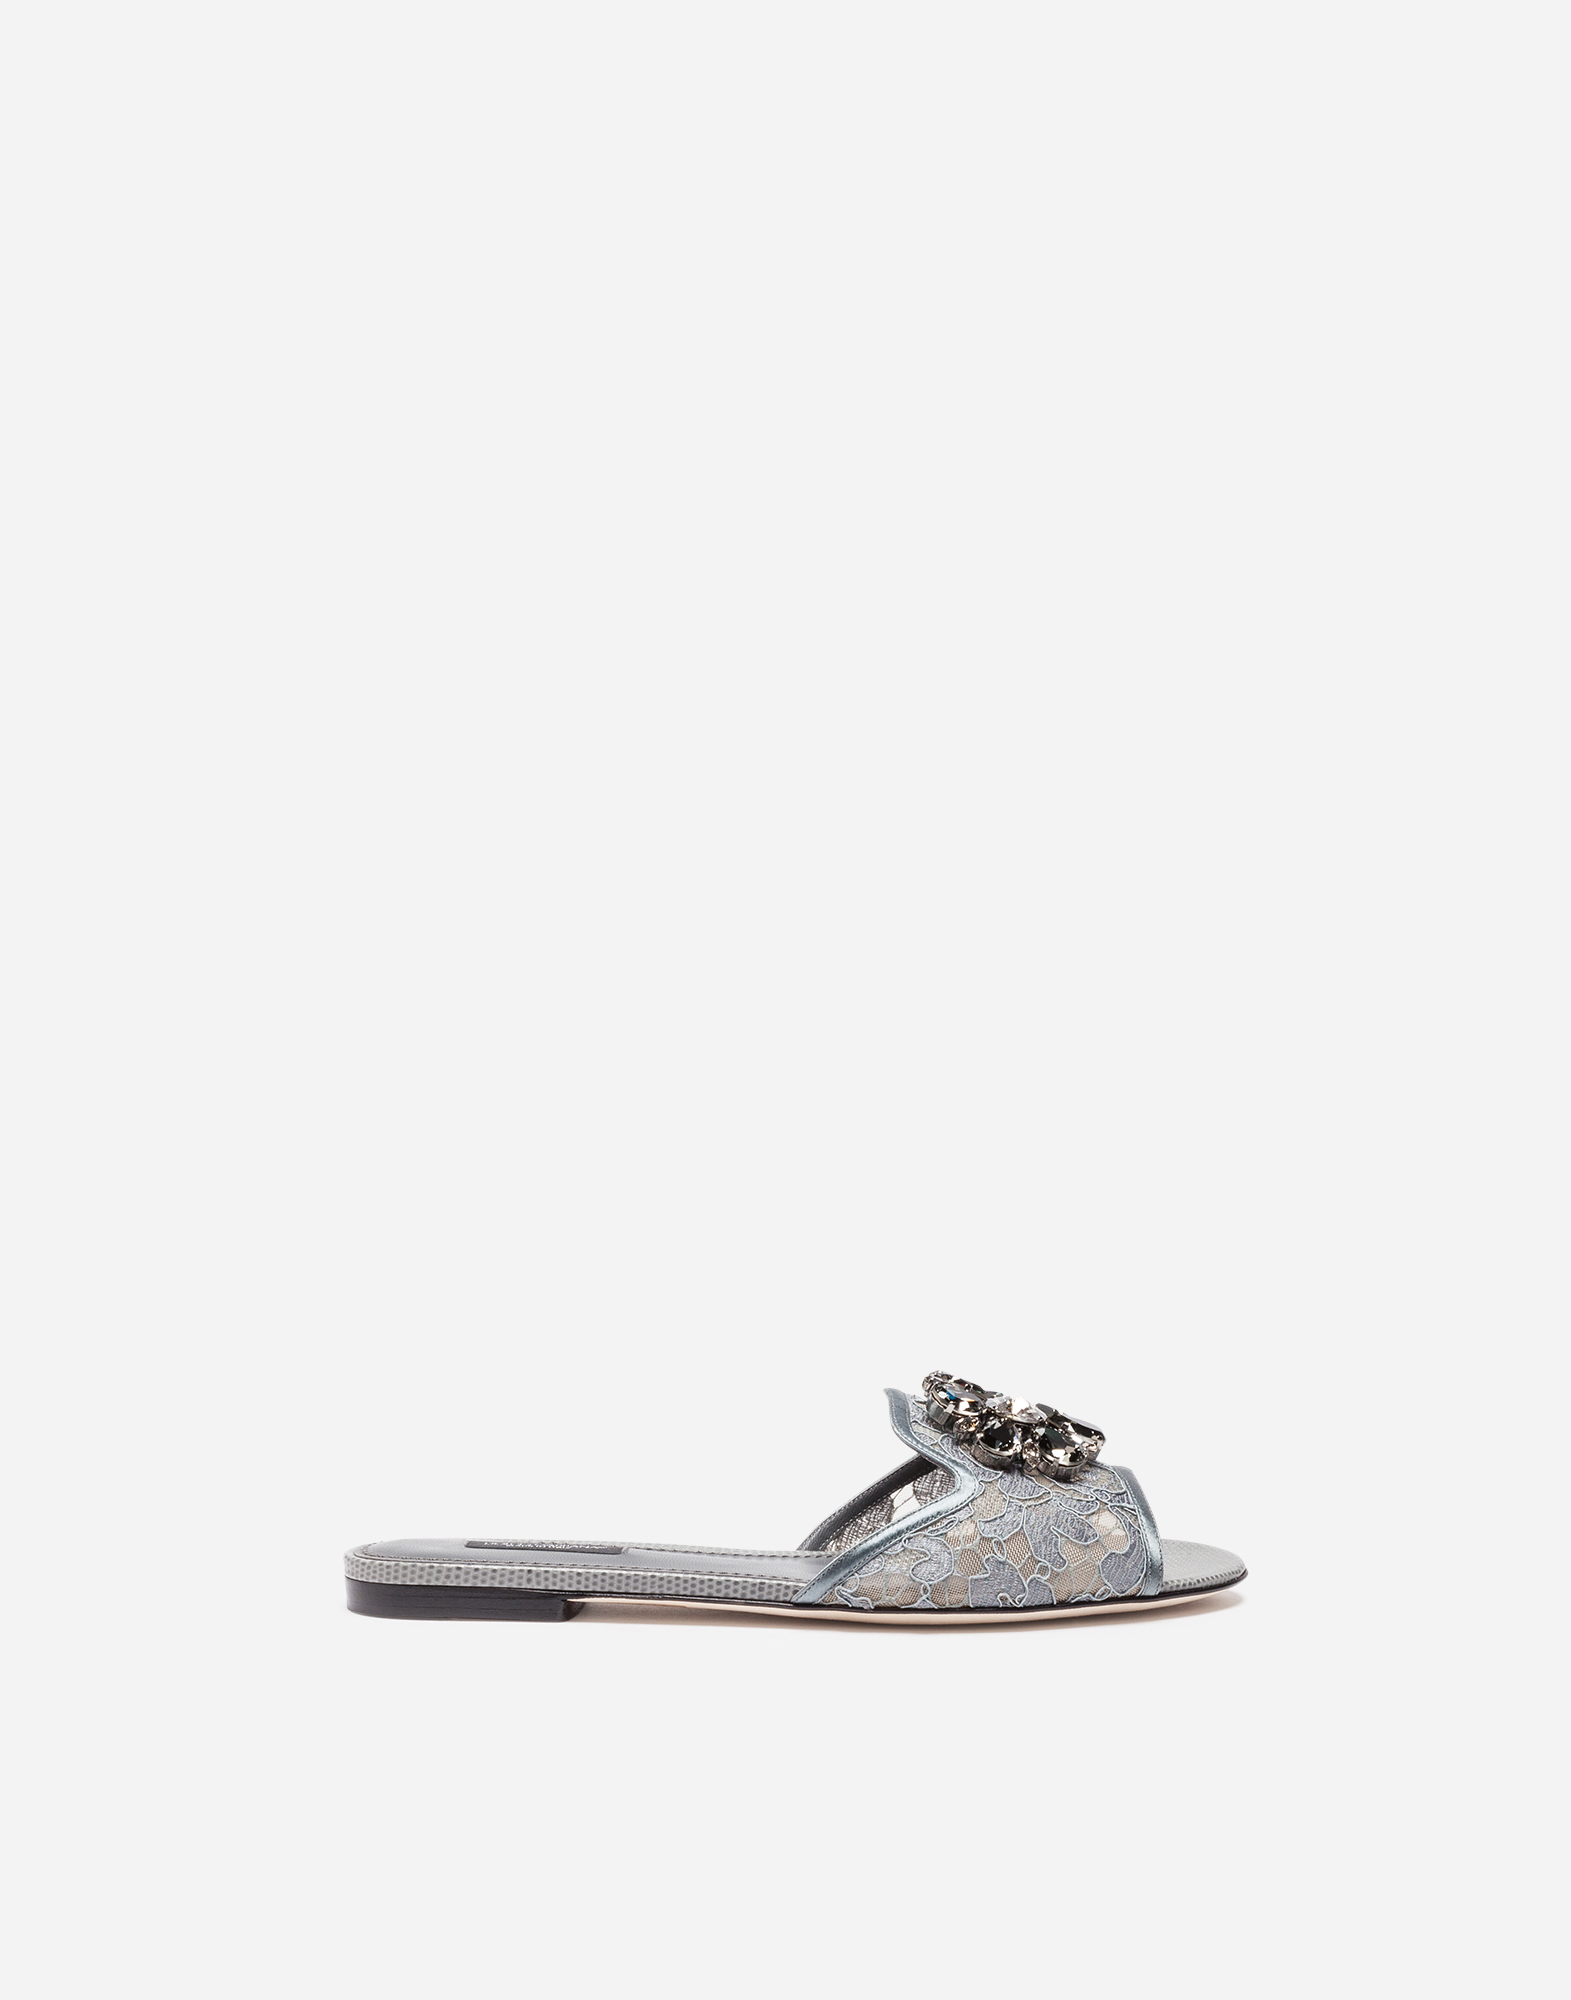 Lace rainbow slides with brooch detailing in Grey